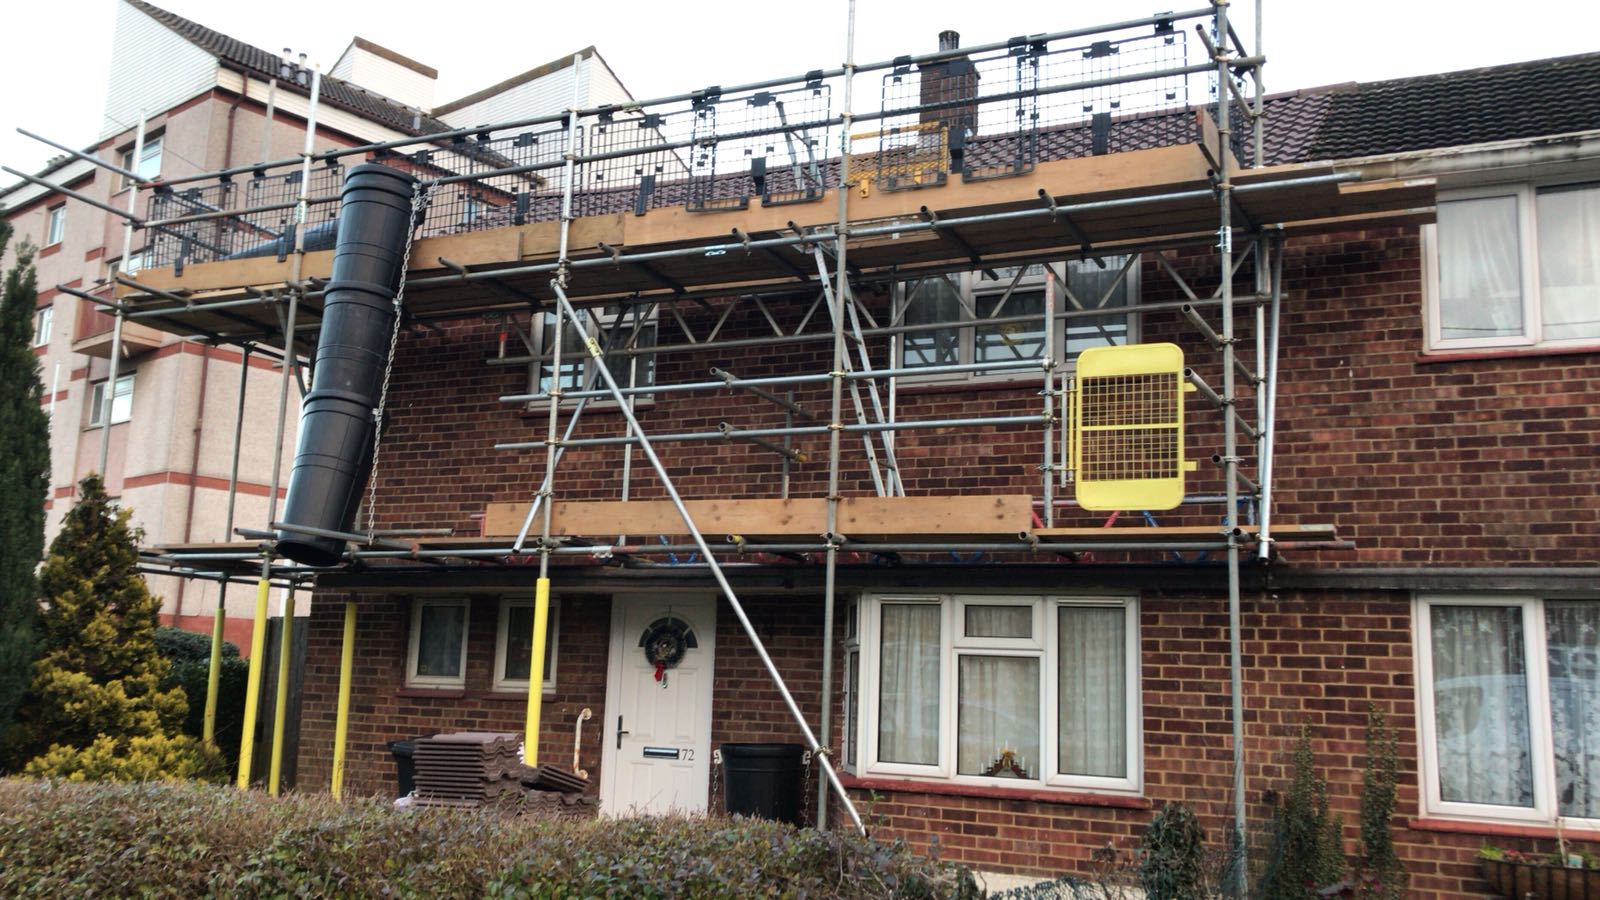 Images Select Scaffolding Services Ltd